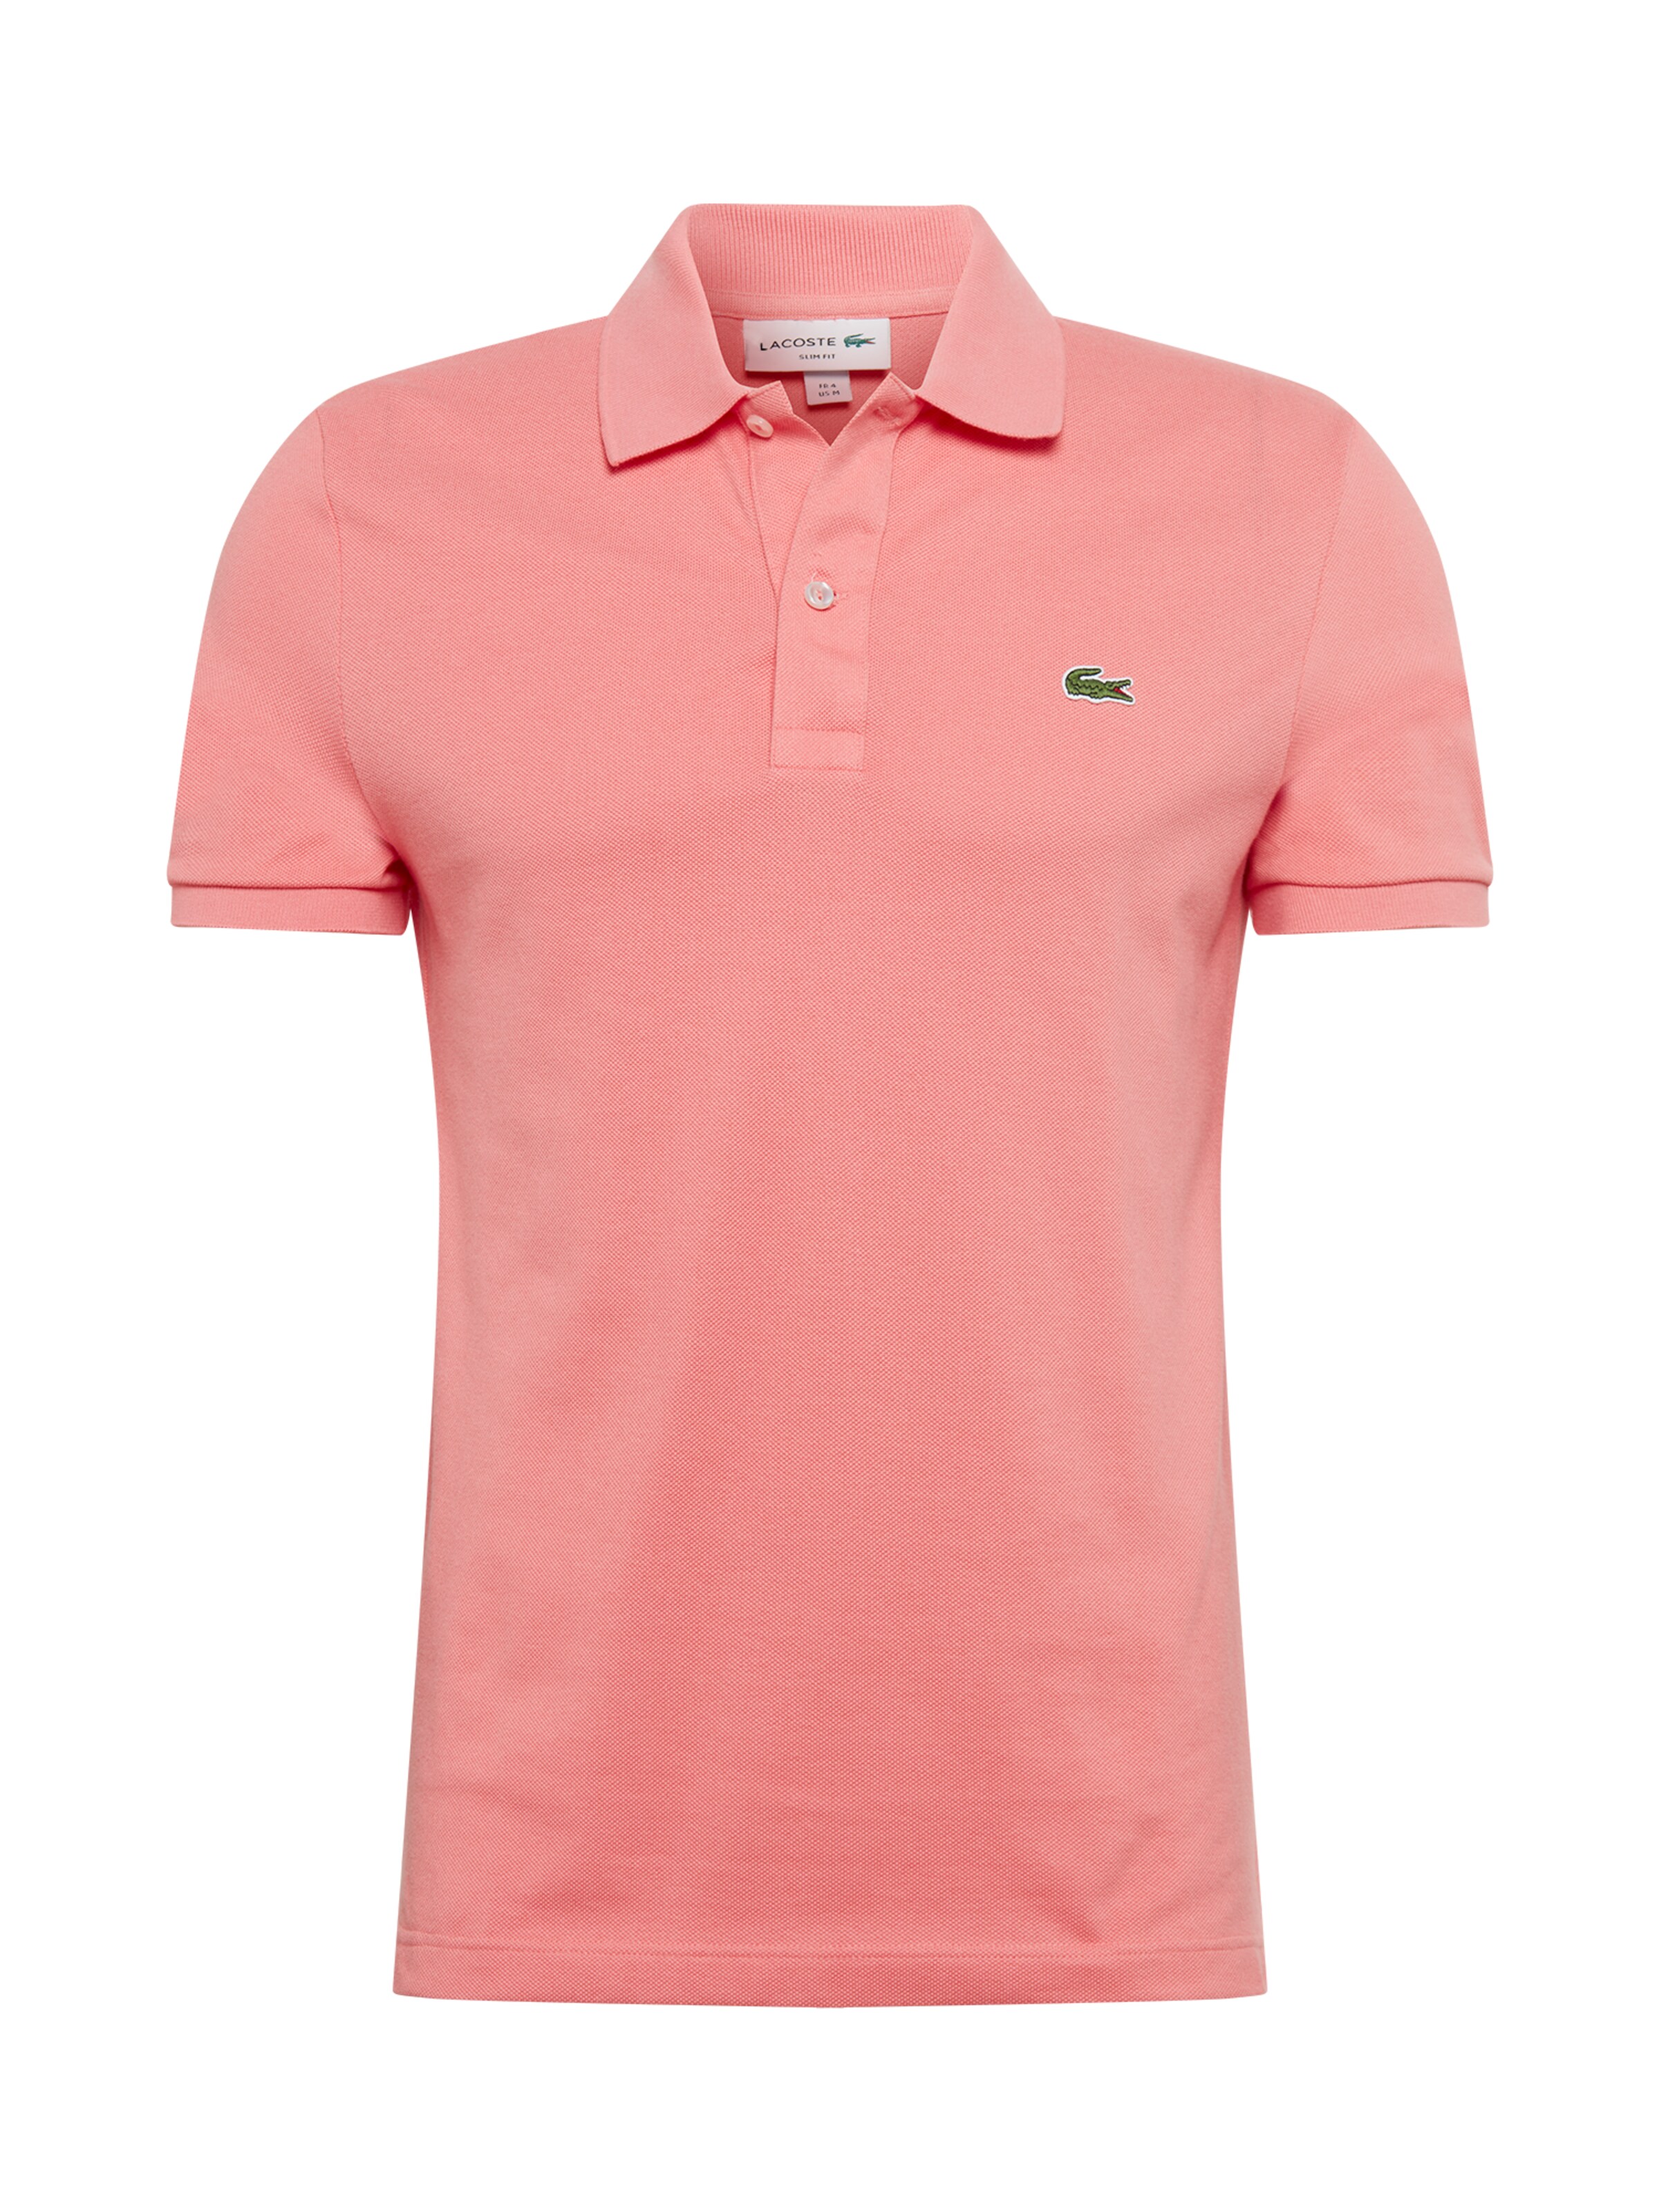 lacoste shirt pink